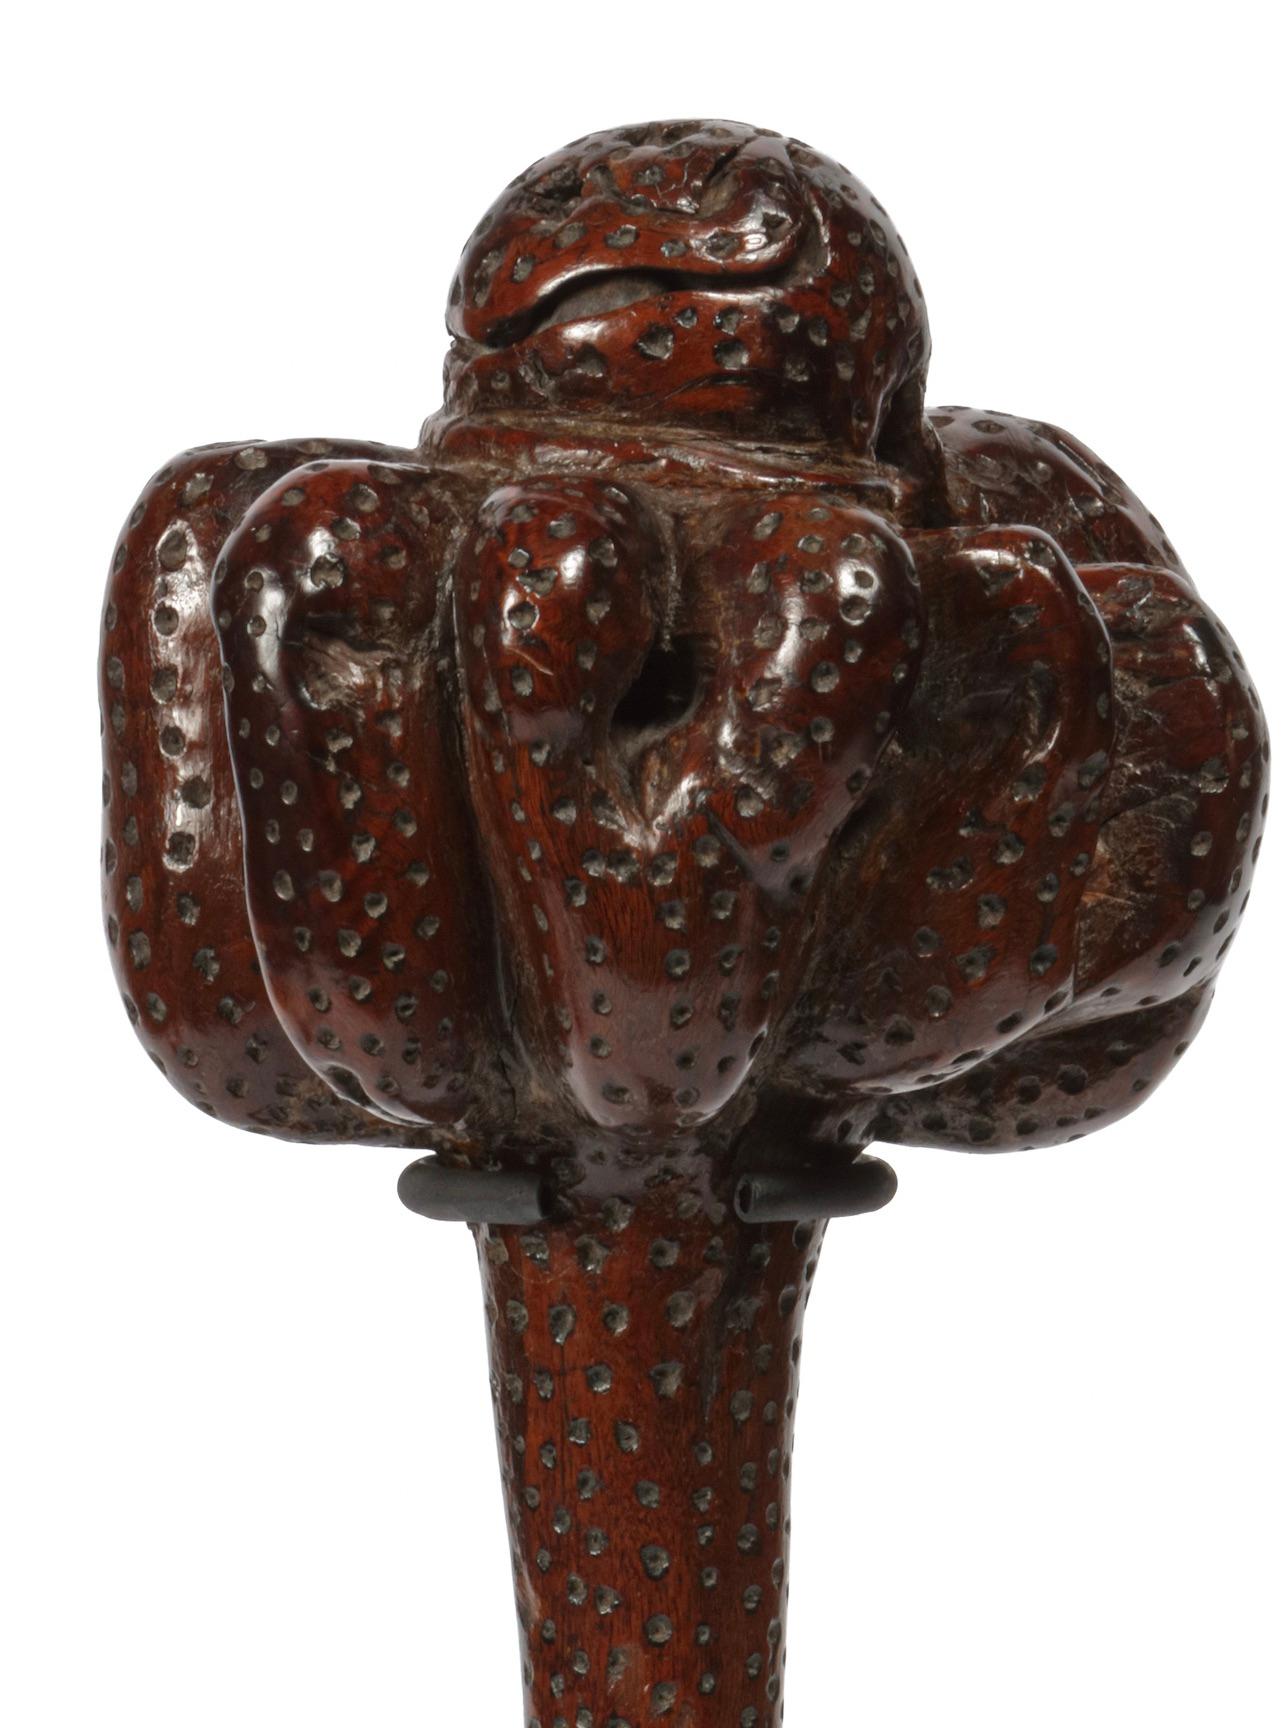 A Polynesian hardwood Ula tavatava or throwing war club
Fiji, probably 18th century

All-over decorated in incised pattern, the bulbous top seems to have a stone grown into it.

H. 42 cm
 
Including museum-quality powder-coated